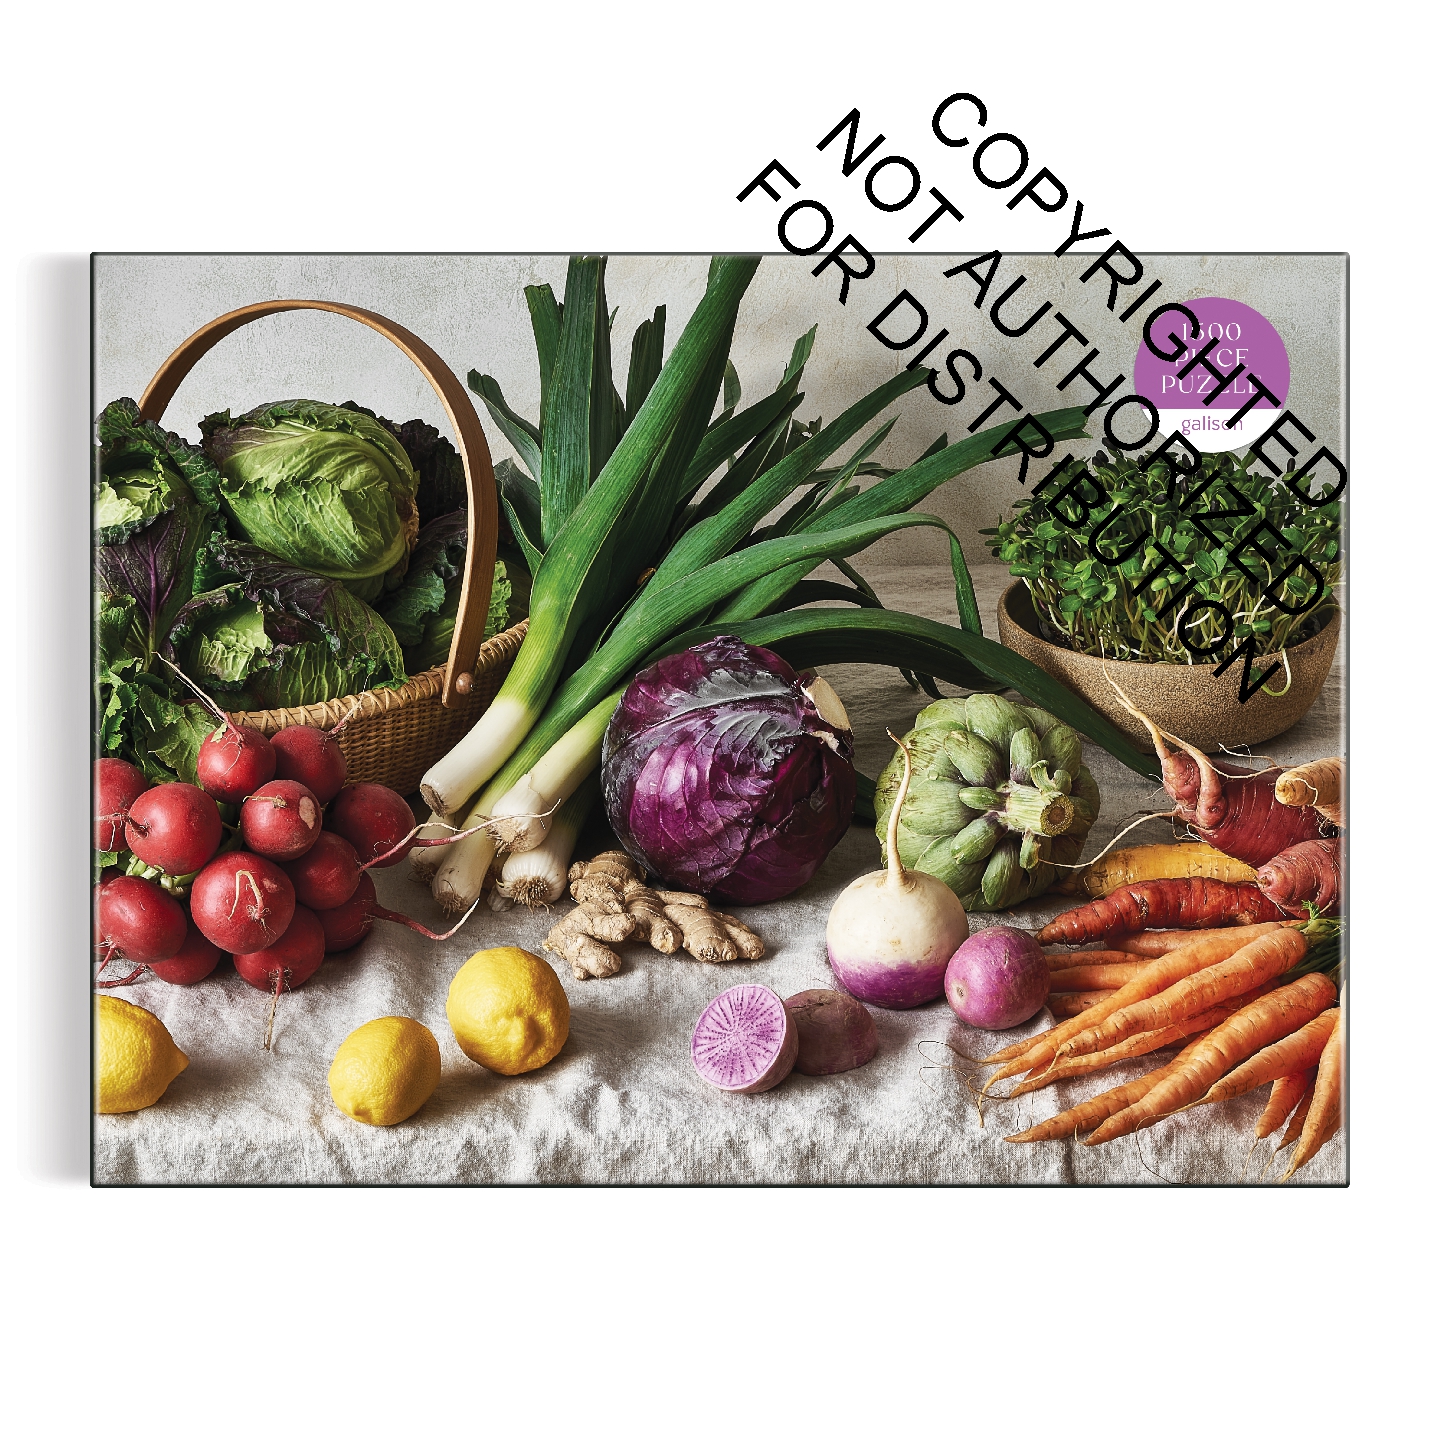 The Greenmarket Table 1500 Piece Puzzle